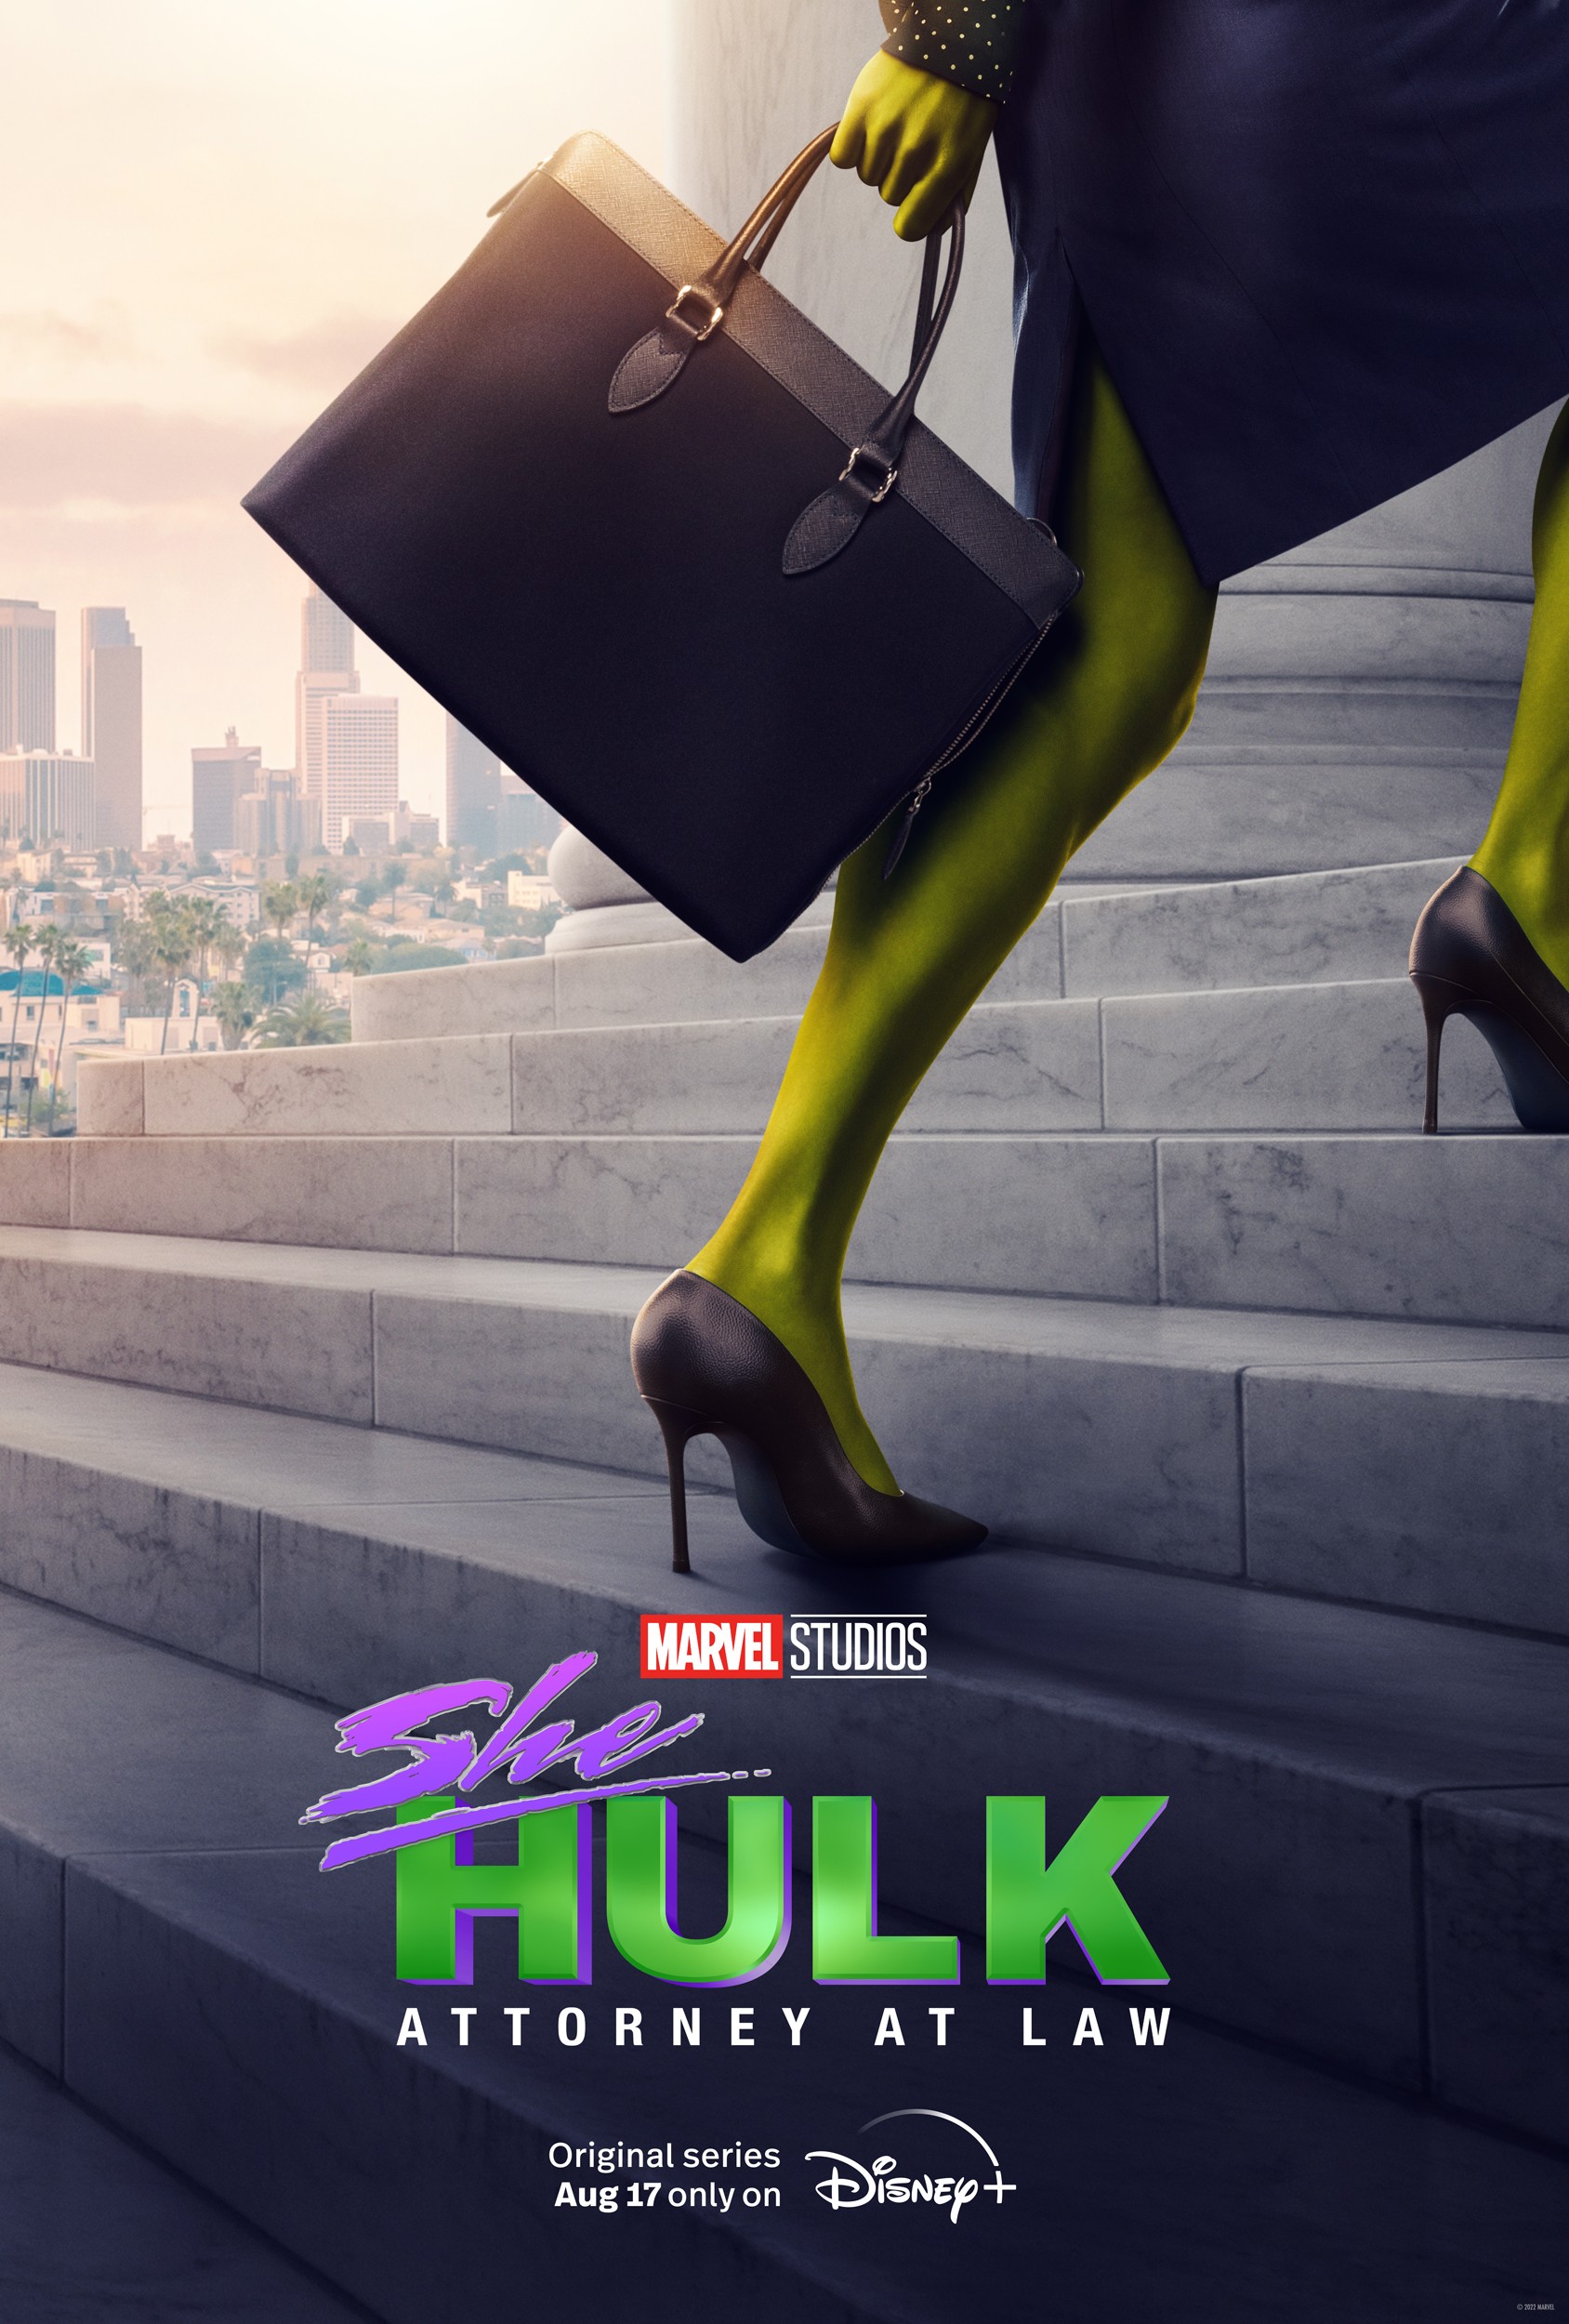 Rotten Tomatoes - The first reviews are in for She-Hulk